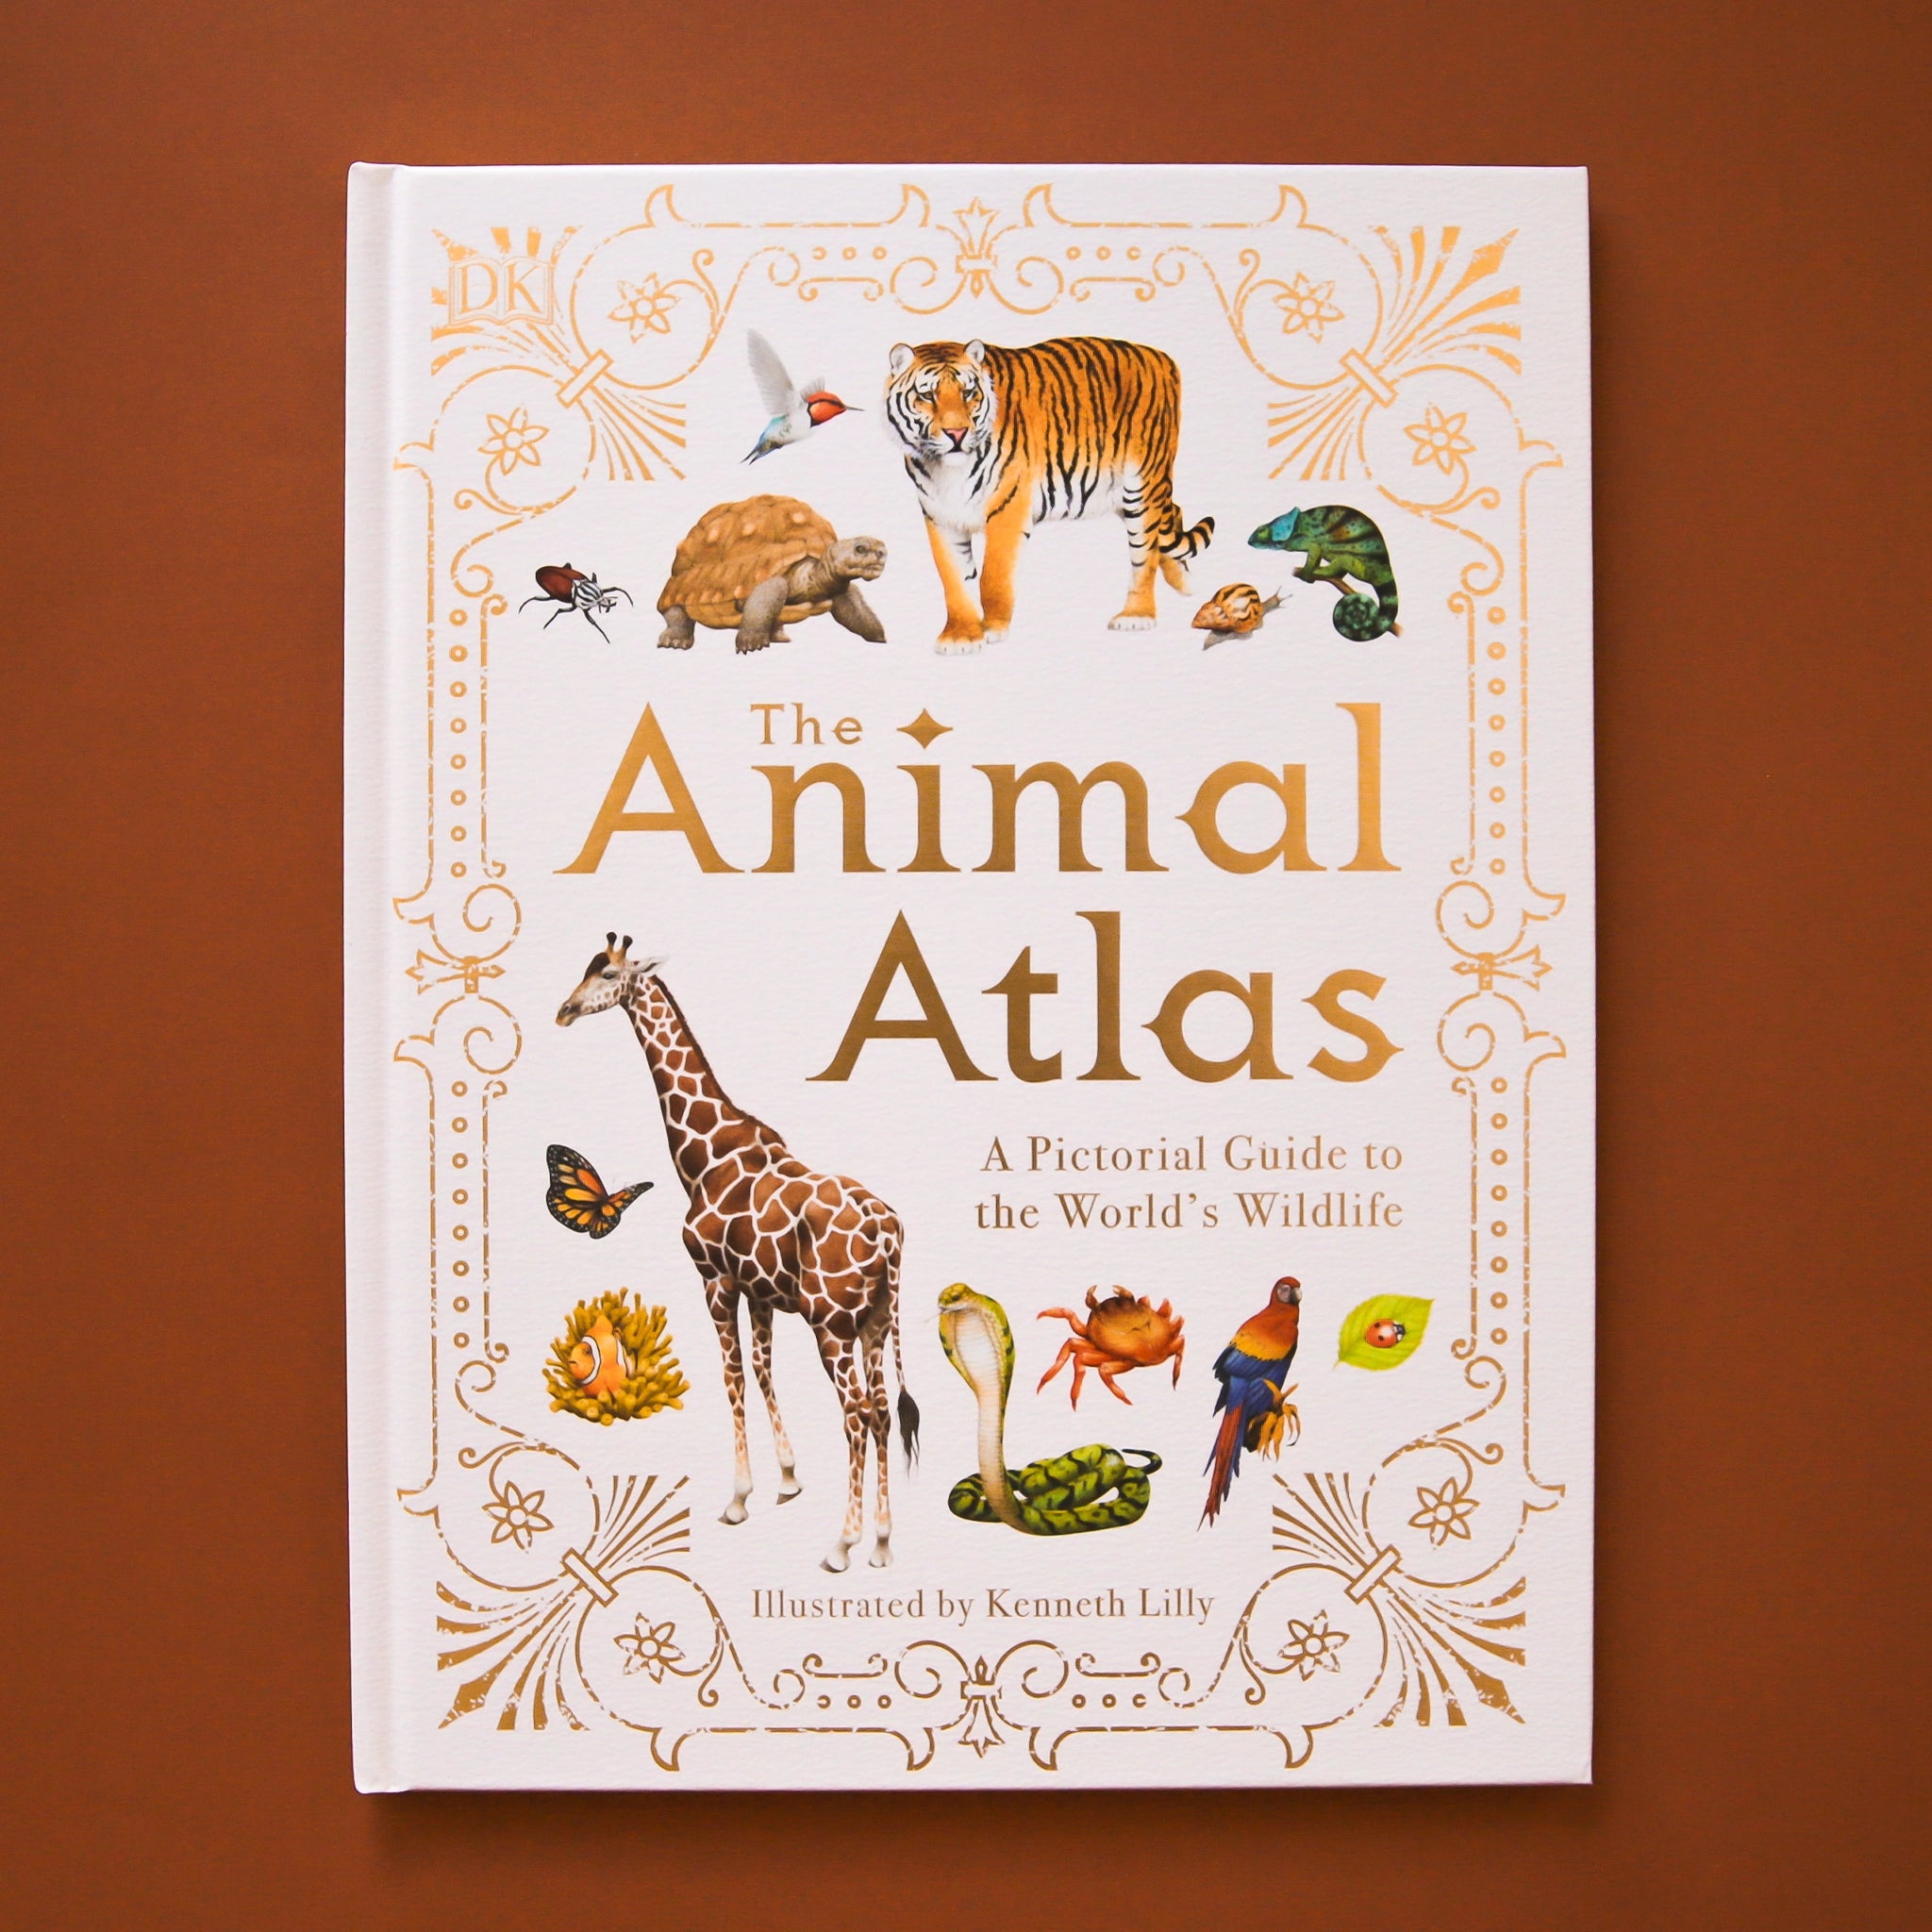 The front cover of the book reads &#39;The Animal Atlas&#39;: A pictorial Guide to the World&#39;s Wildlife&#39; in gold lettering. The text is surround by a variety of animals including tigers, turtles, giraffes, and more. The cover of the book is bordered with elegant gold detailing.